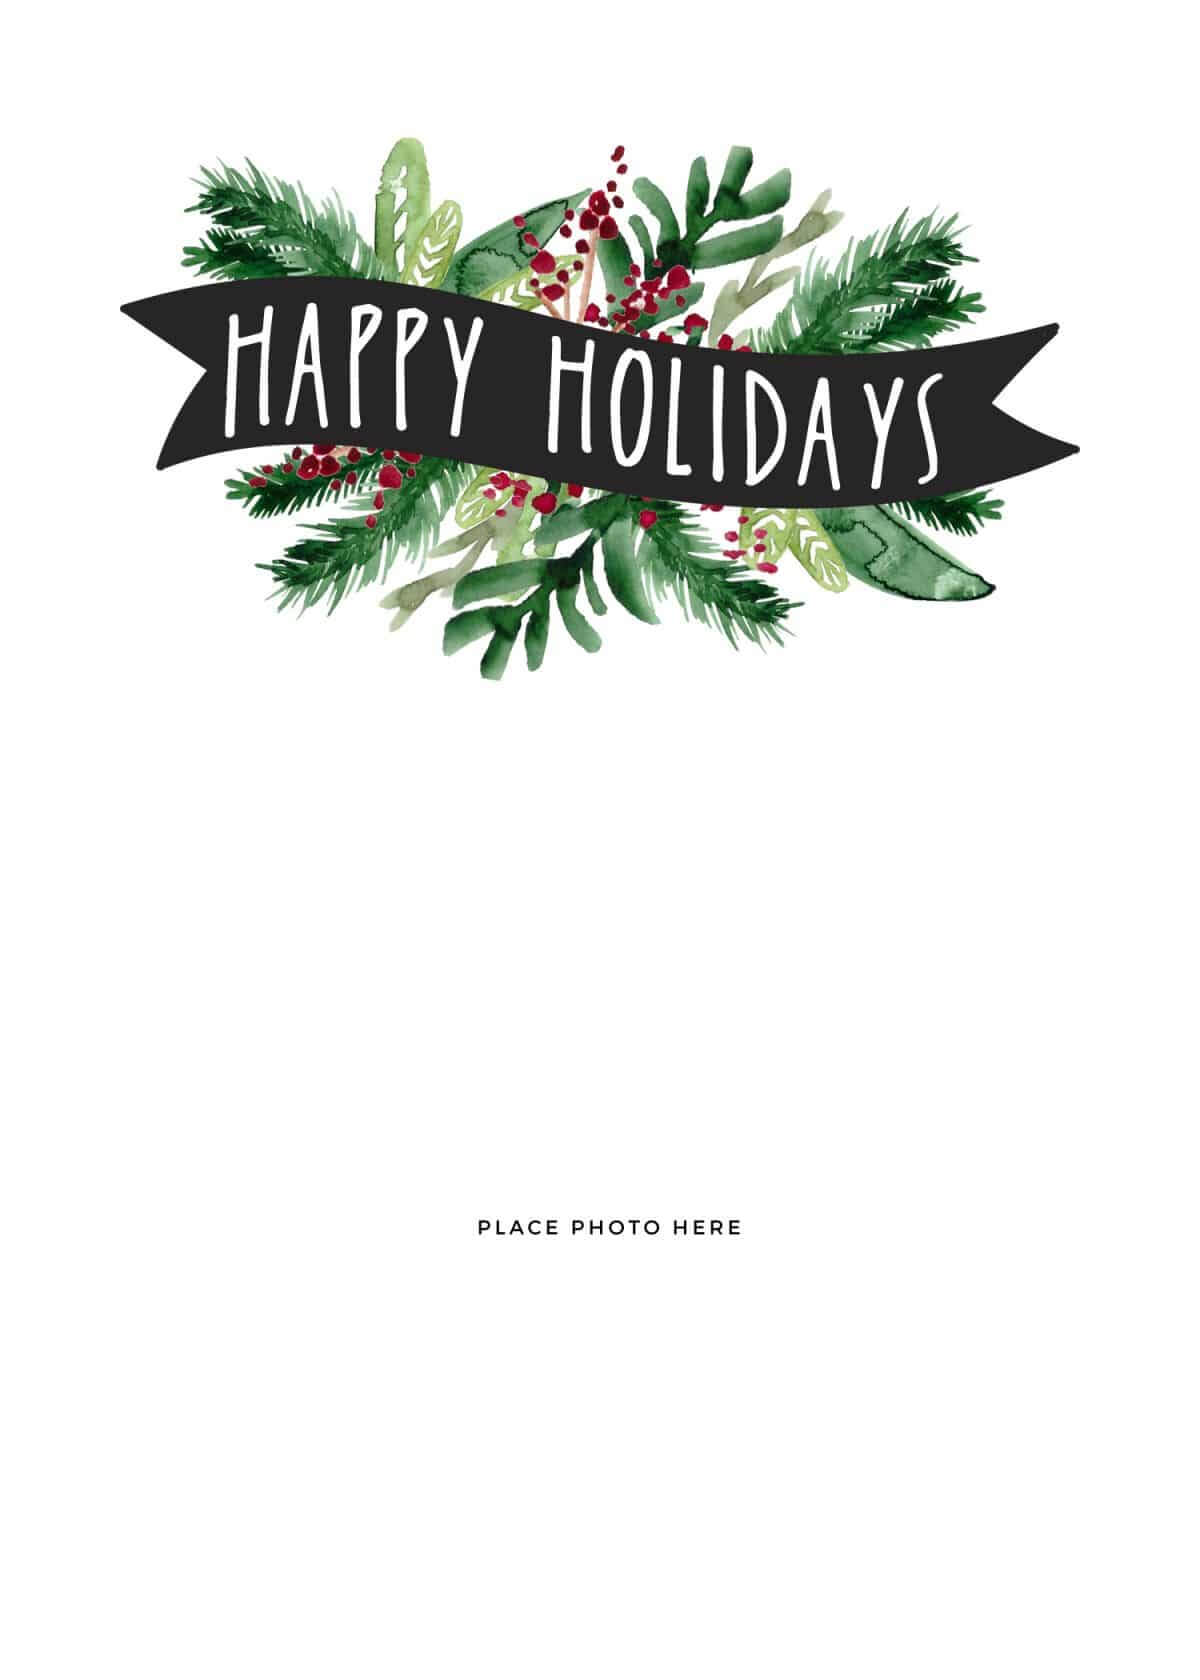 Make Your Own Photo Christmas Cards (For Free!) – Somewhat Regarding Christmas Photo Cards Templates Free Downloads